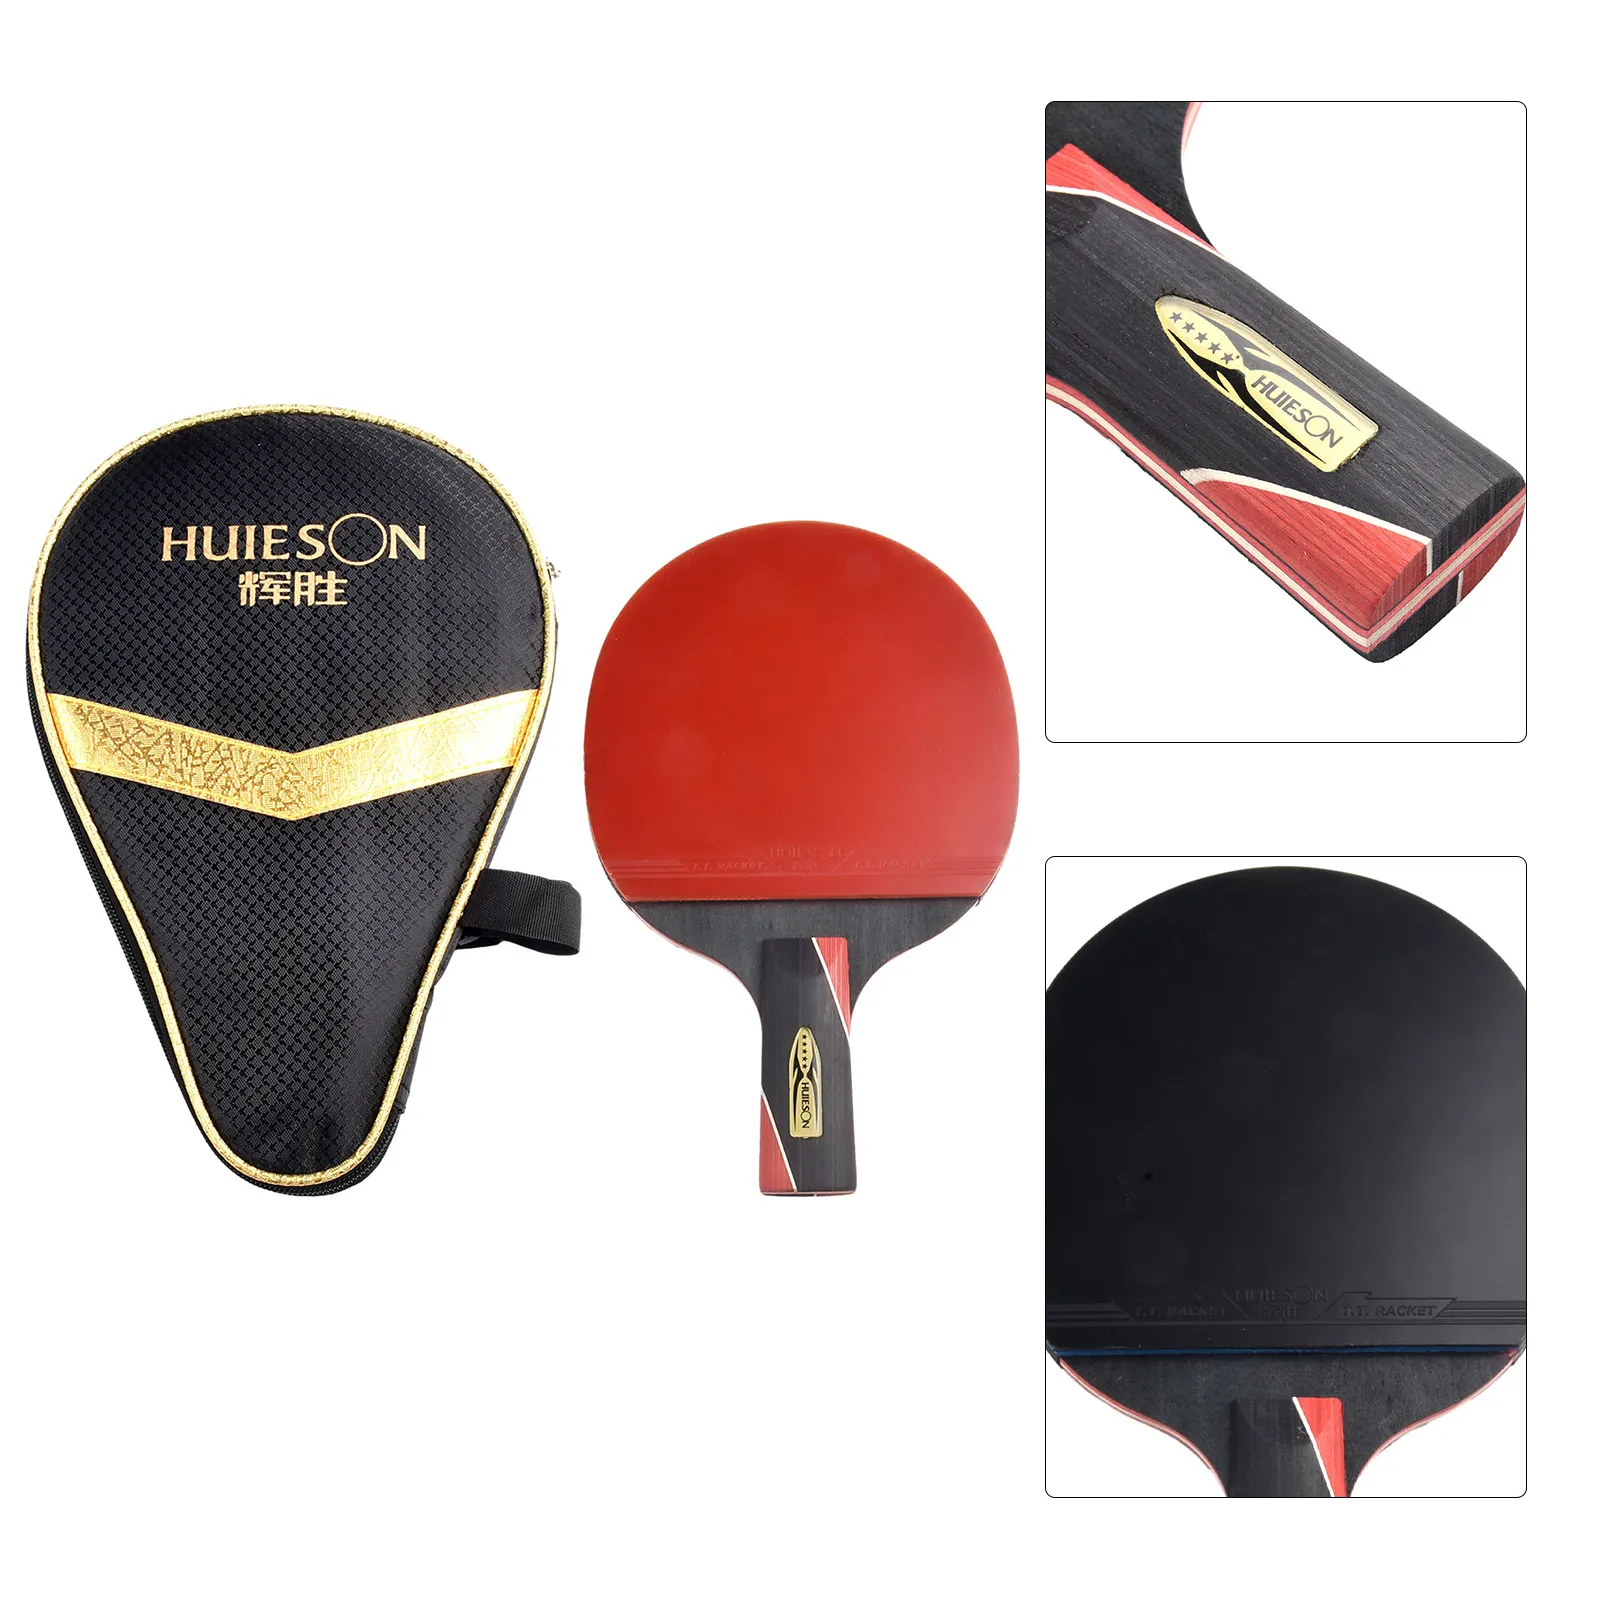 

Racket Case Ping Pong Paddle Light Paddle Ping Pong Racket Single Stability Table Training Bat Carbon Fiber+Rubber